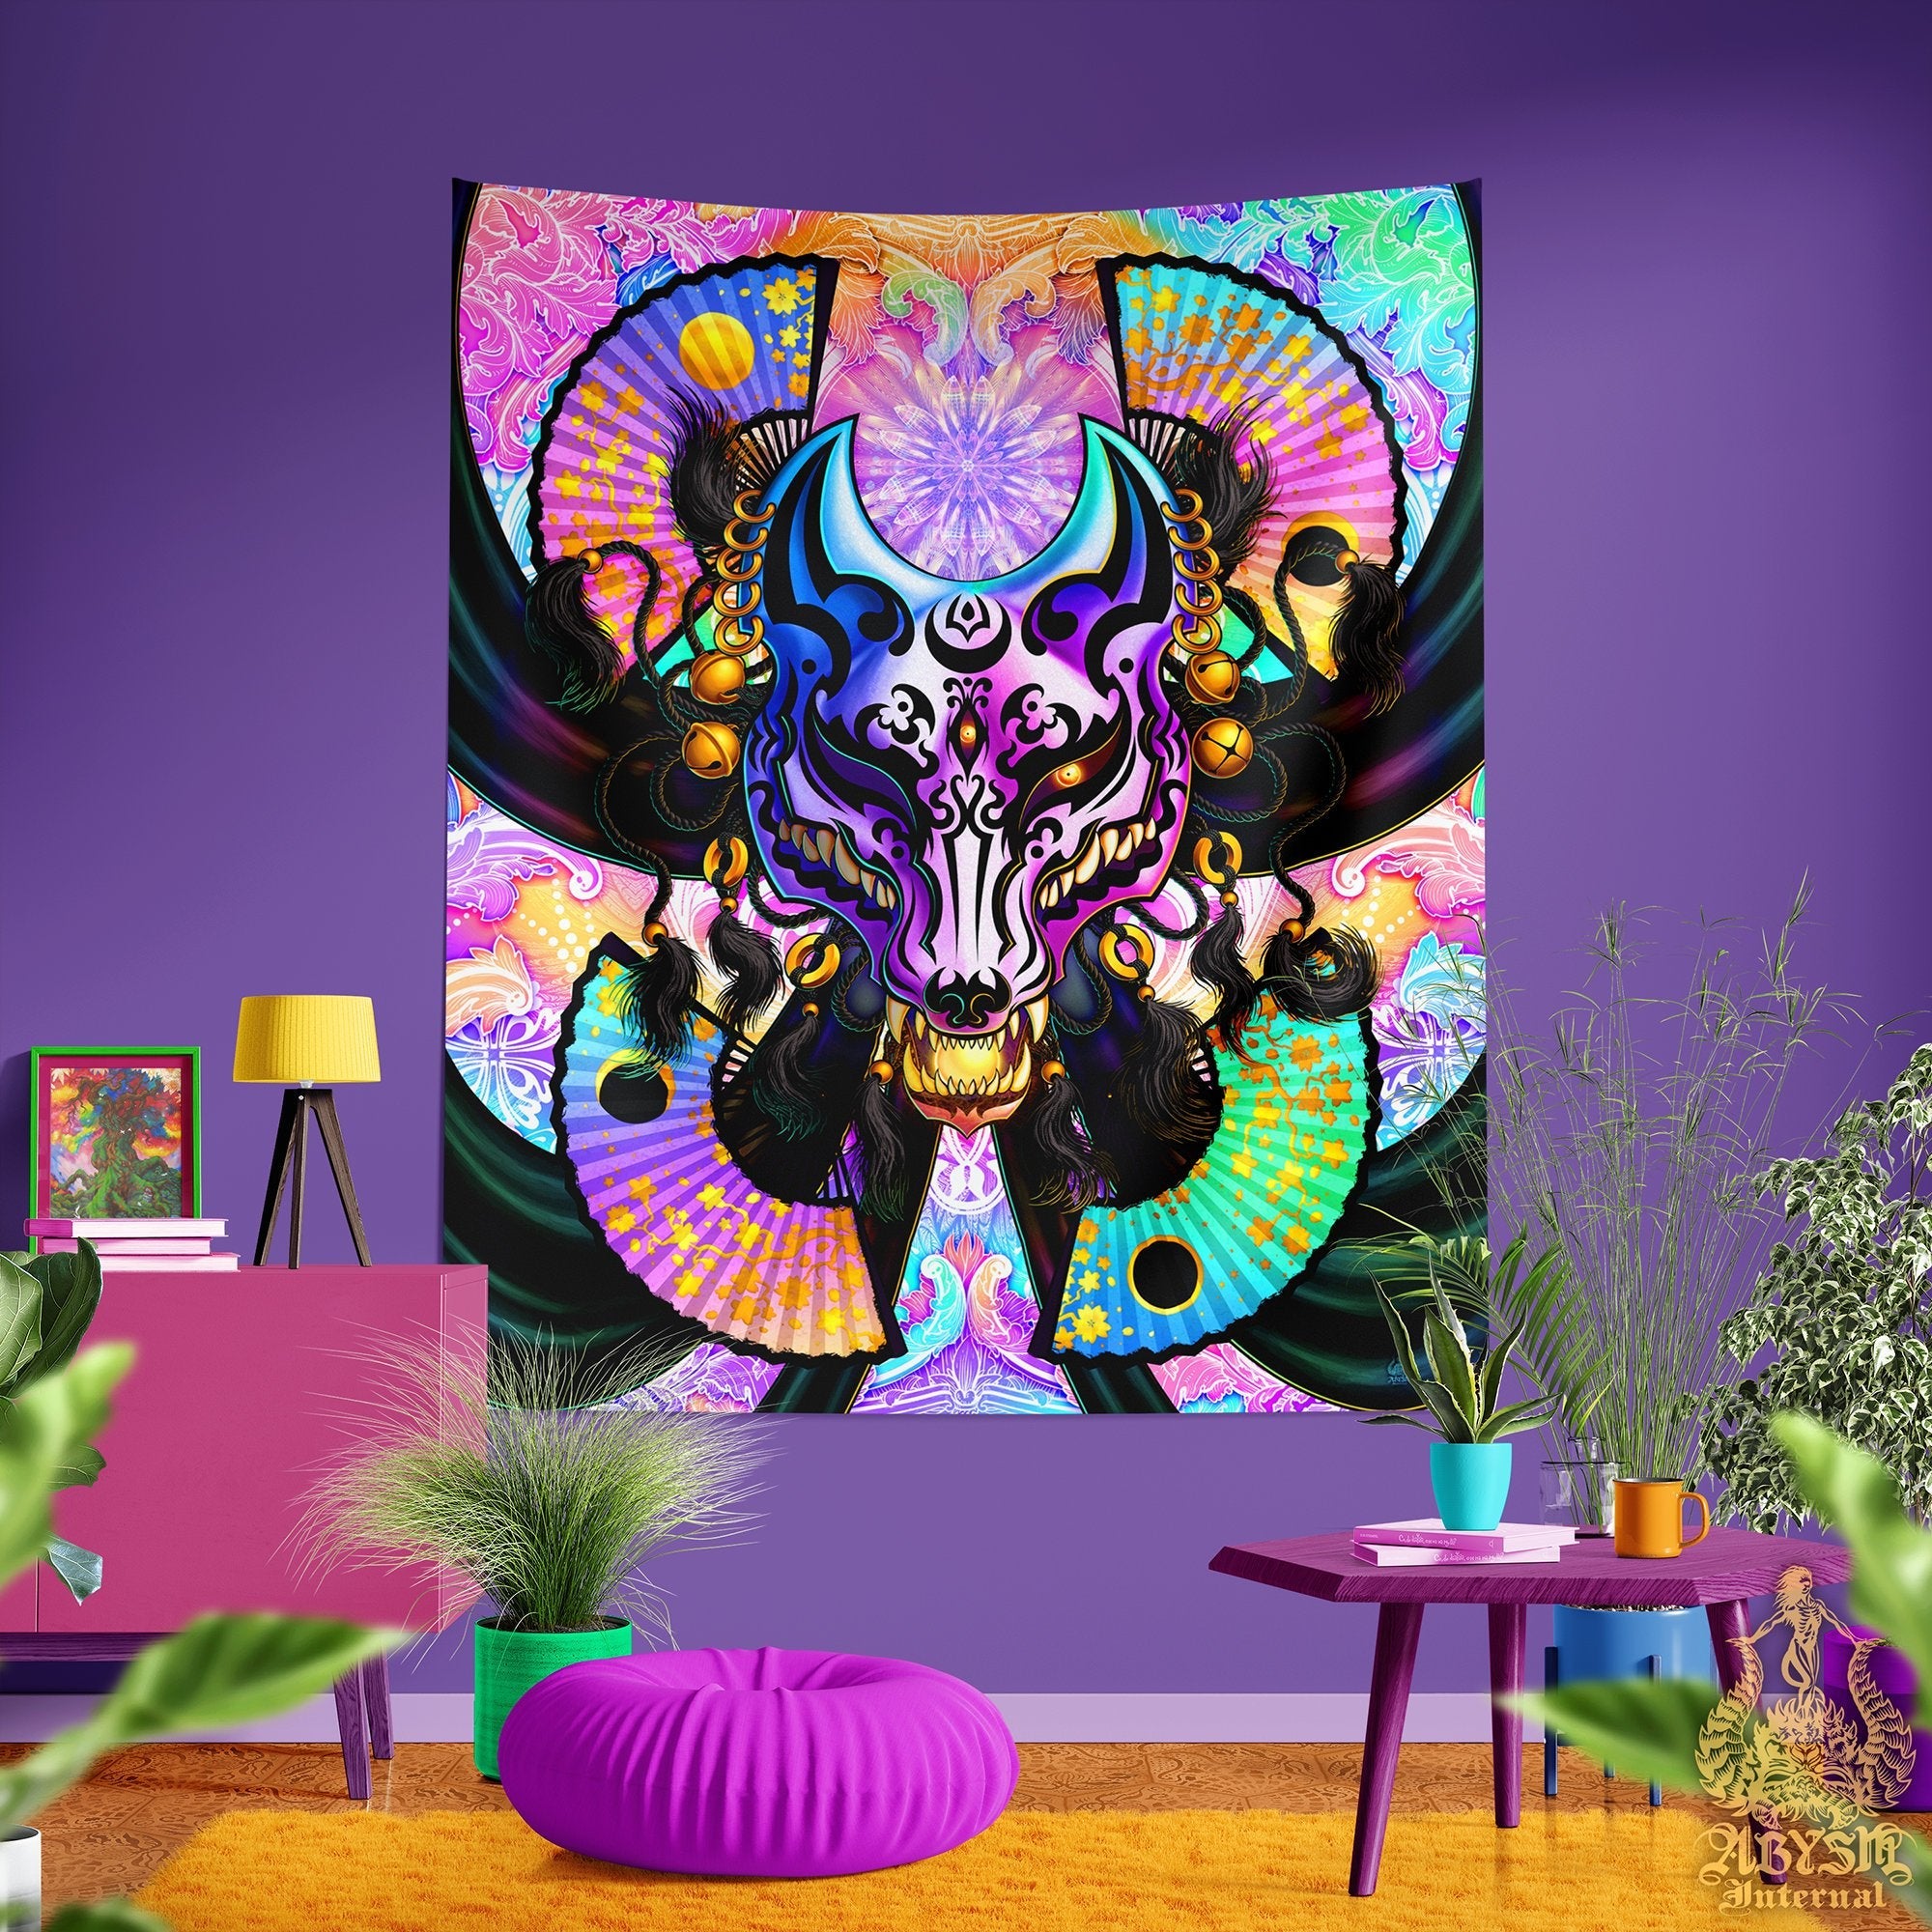 Holographic Tapestry, Japanese Wall Hanging, Anime Home Decor, Art Print, Okami, Kitsune Mask, Eclectic and Funky - Pastel Punk Fox - Abysm Internal